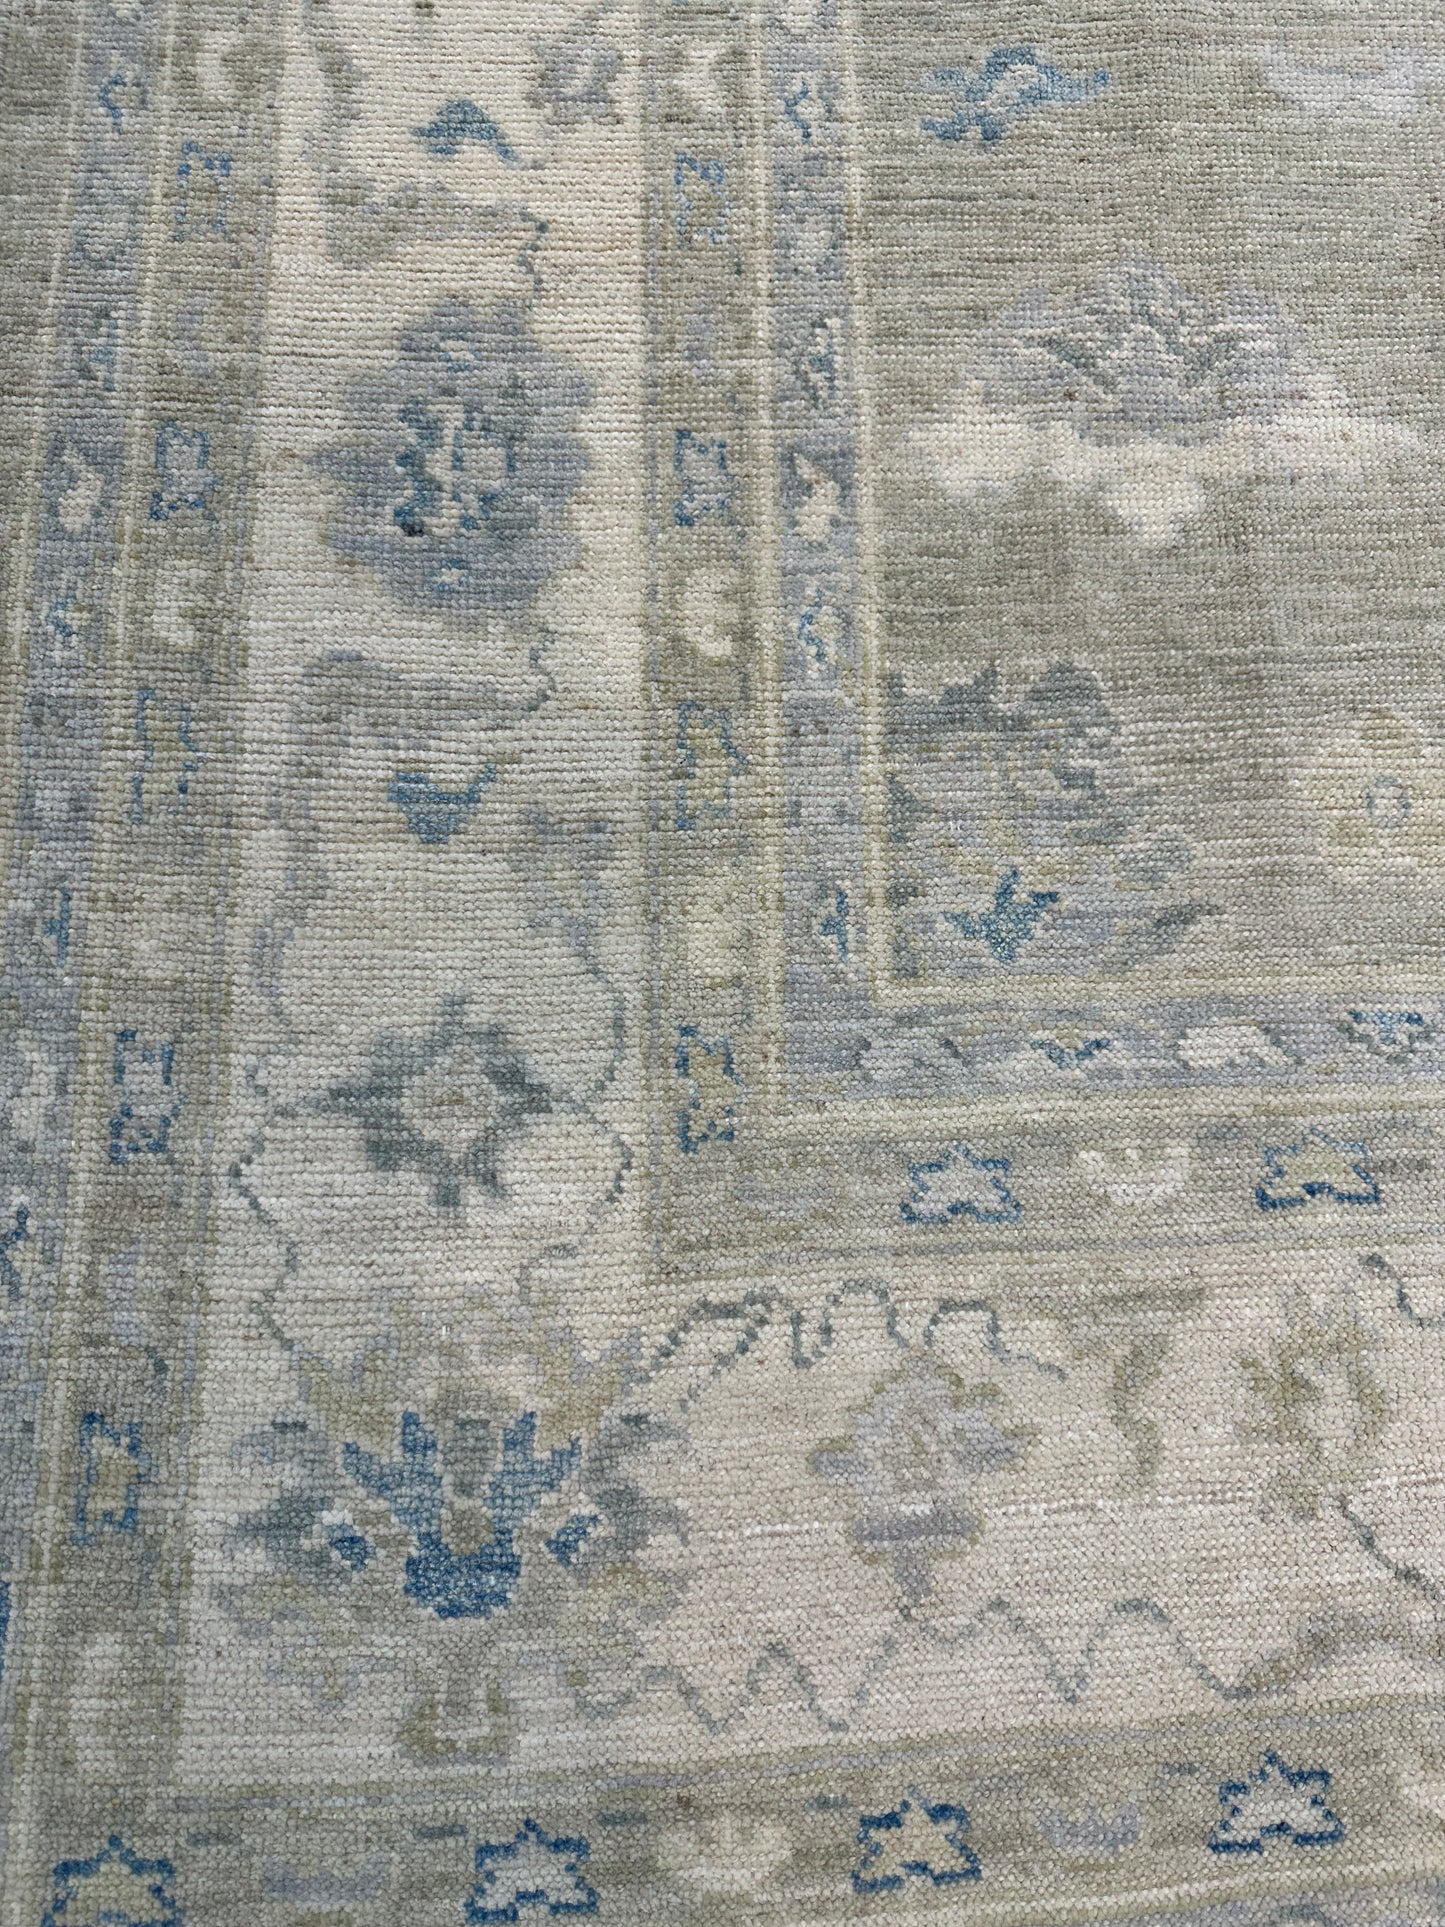 Hand-Knotted Wool Rug Turkish Oushak 7'8" x 10'5"